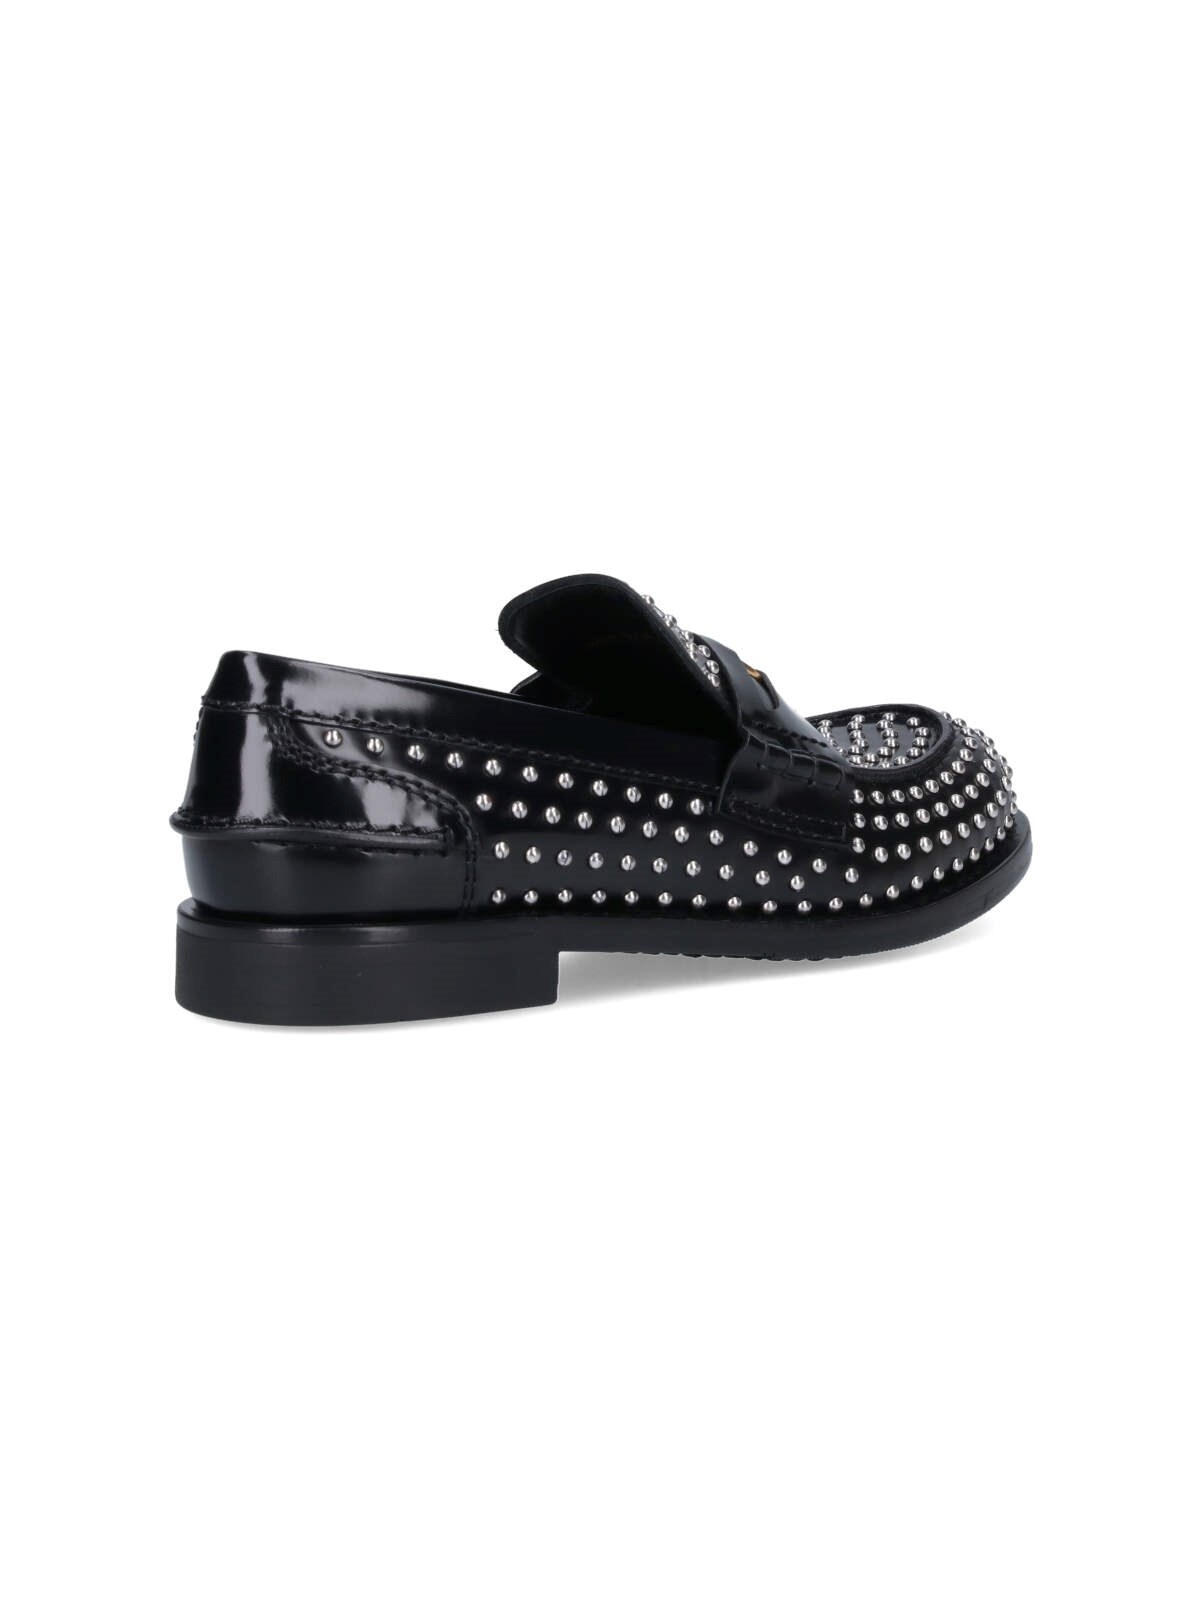 "PENNY LOAFERS" STUDDED LOAFERS - 4